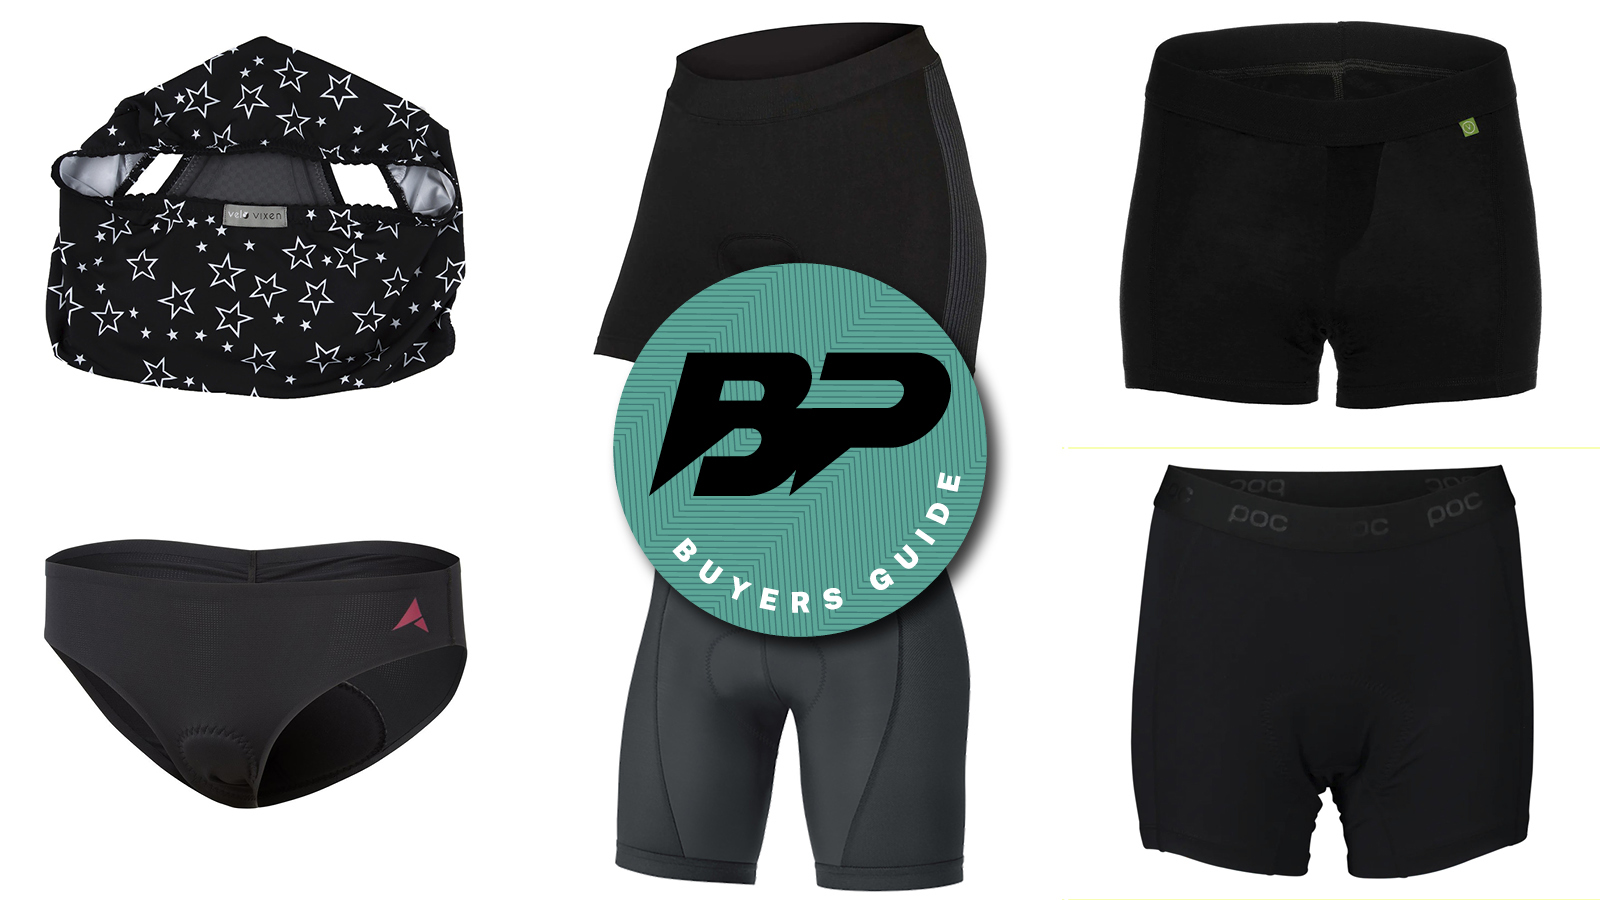 underwear women for cycling, underwear women for cycling Suppliers and  Manufacturers at